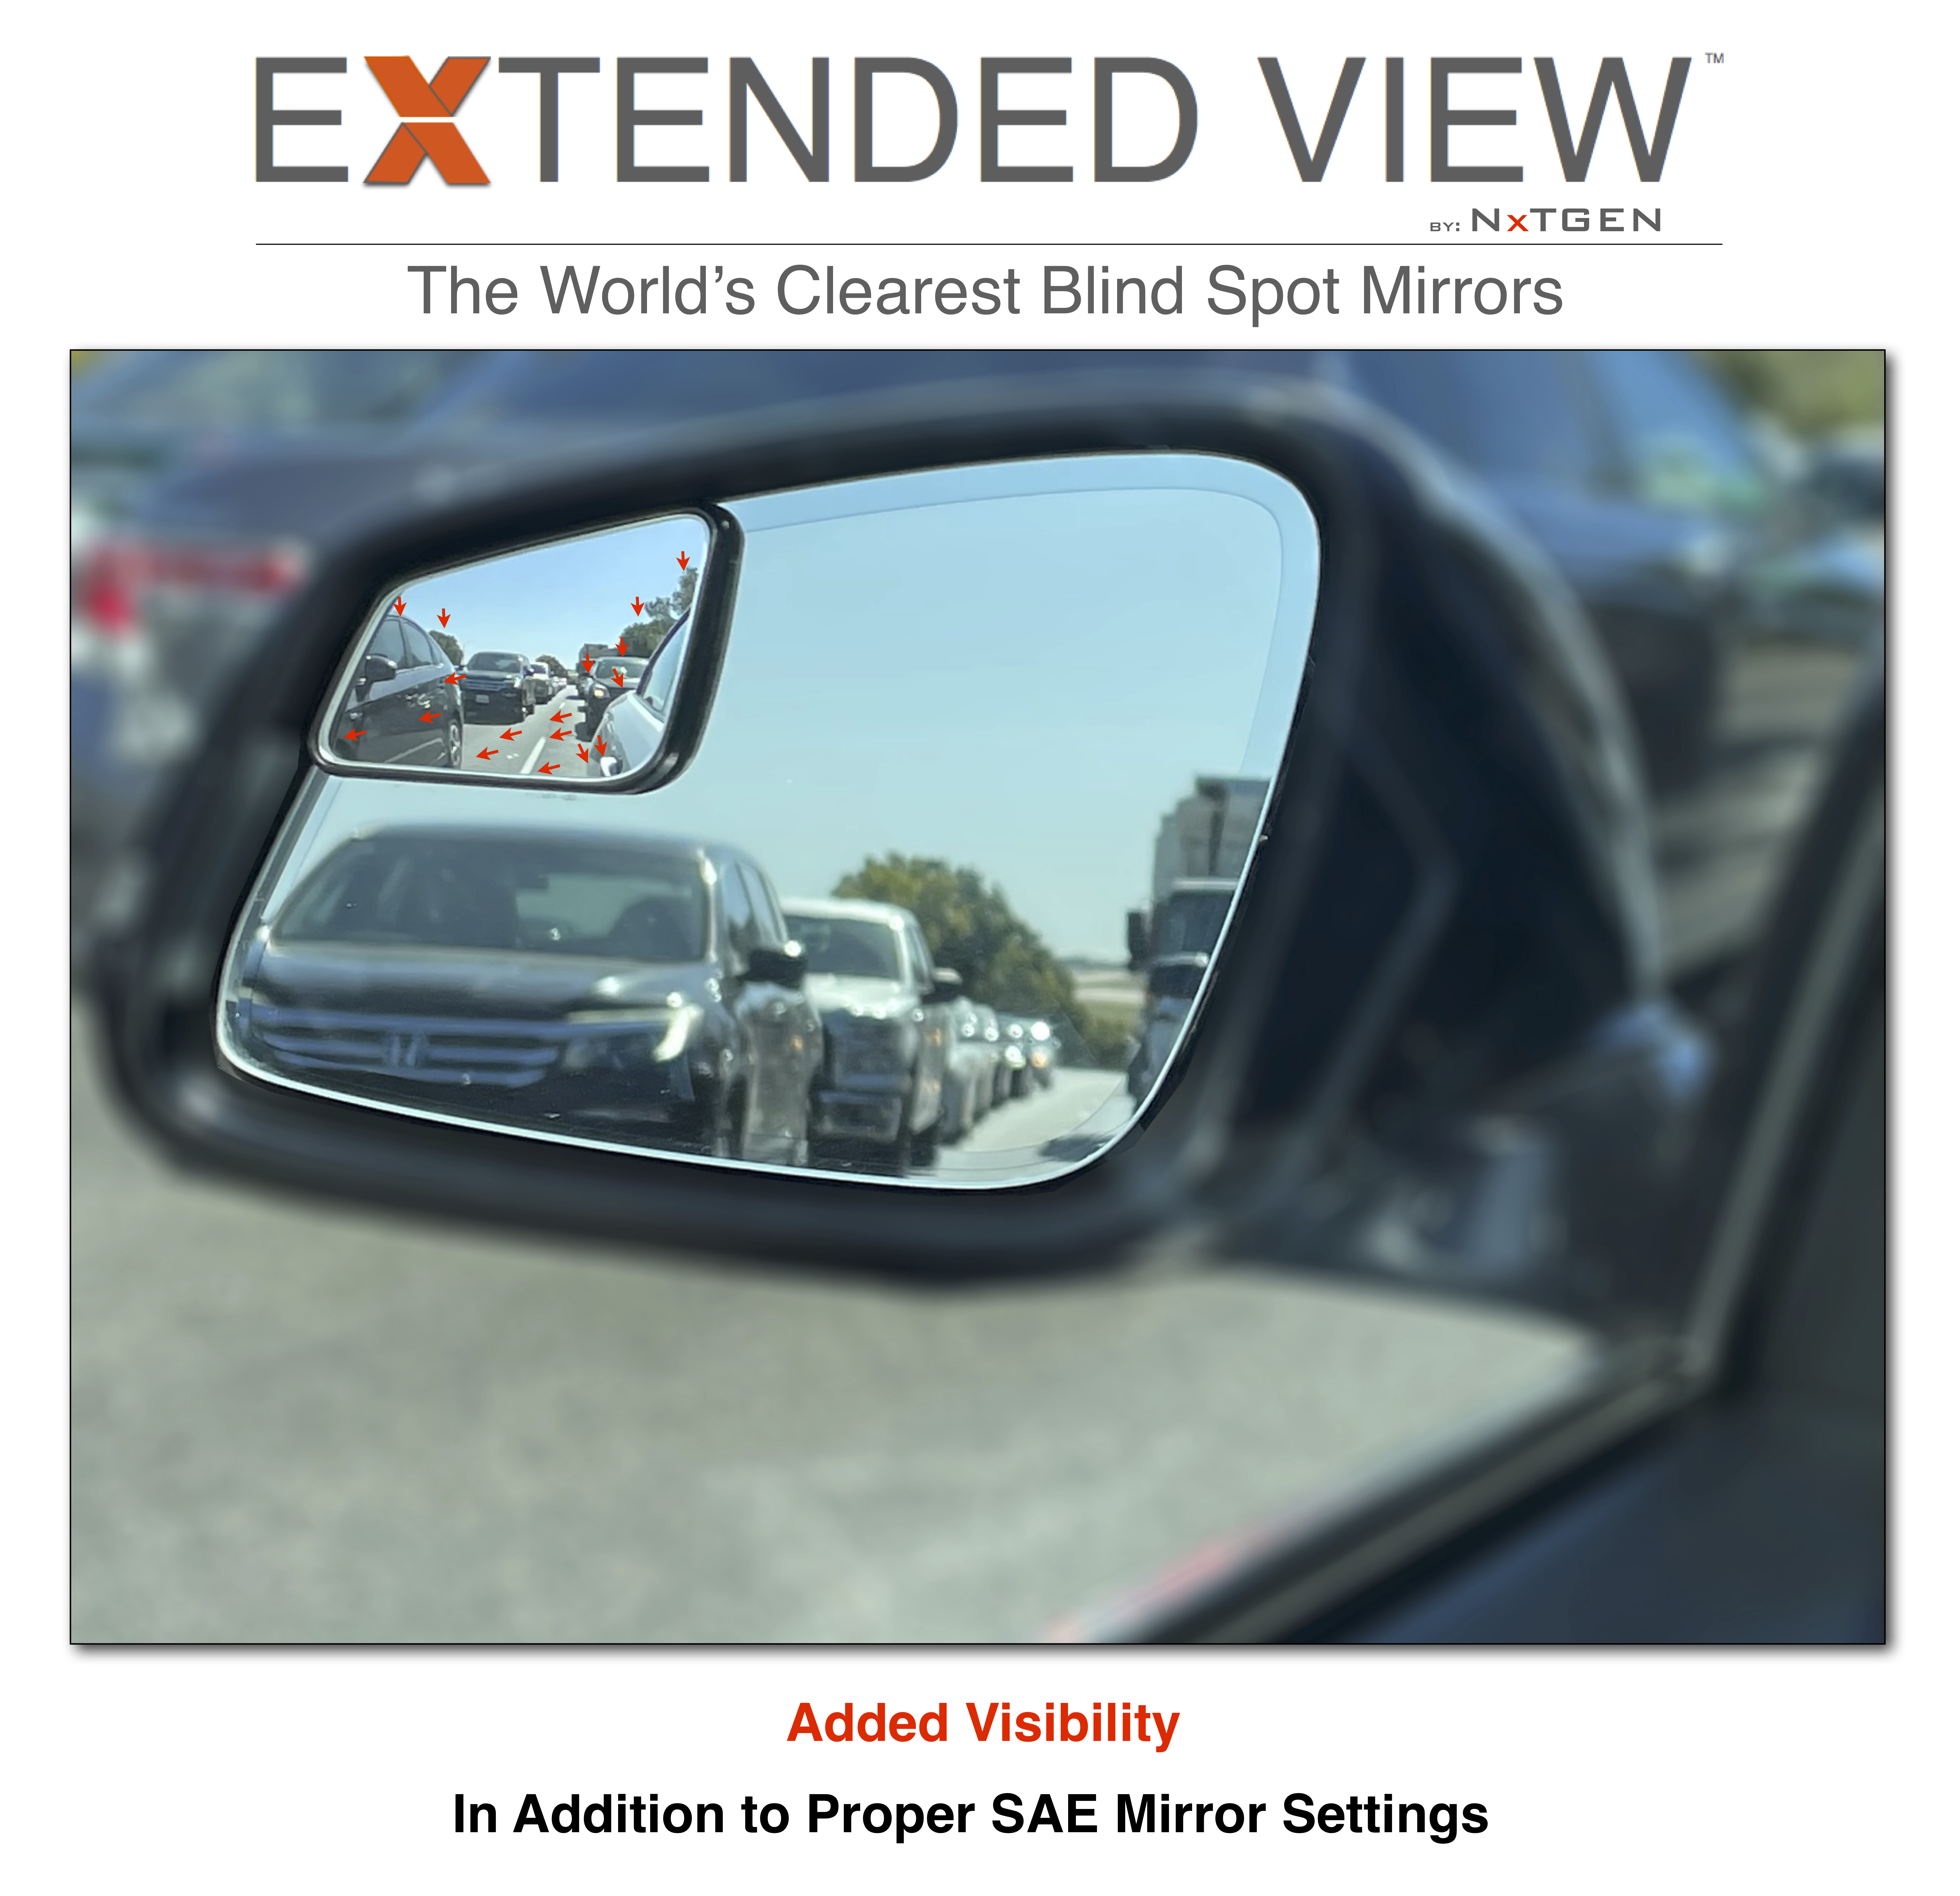 BMW 4 Series Blind Spot Mirrors | F32 Extended View™